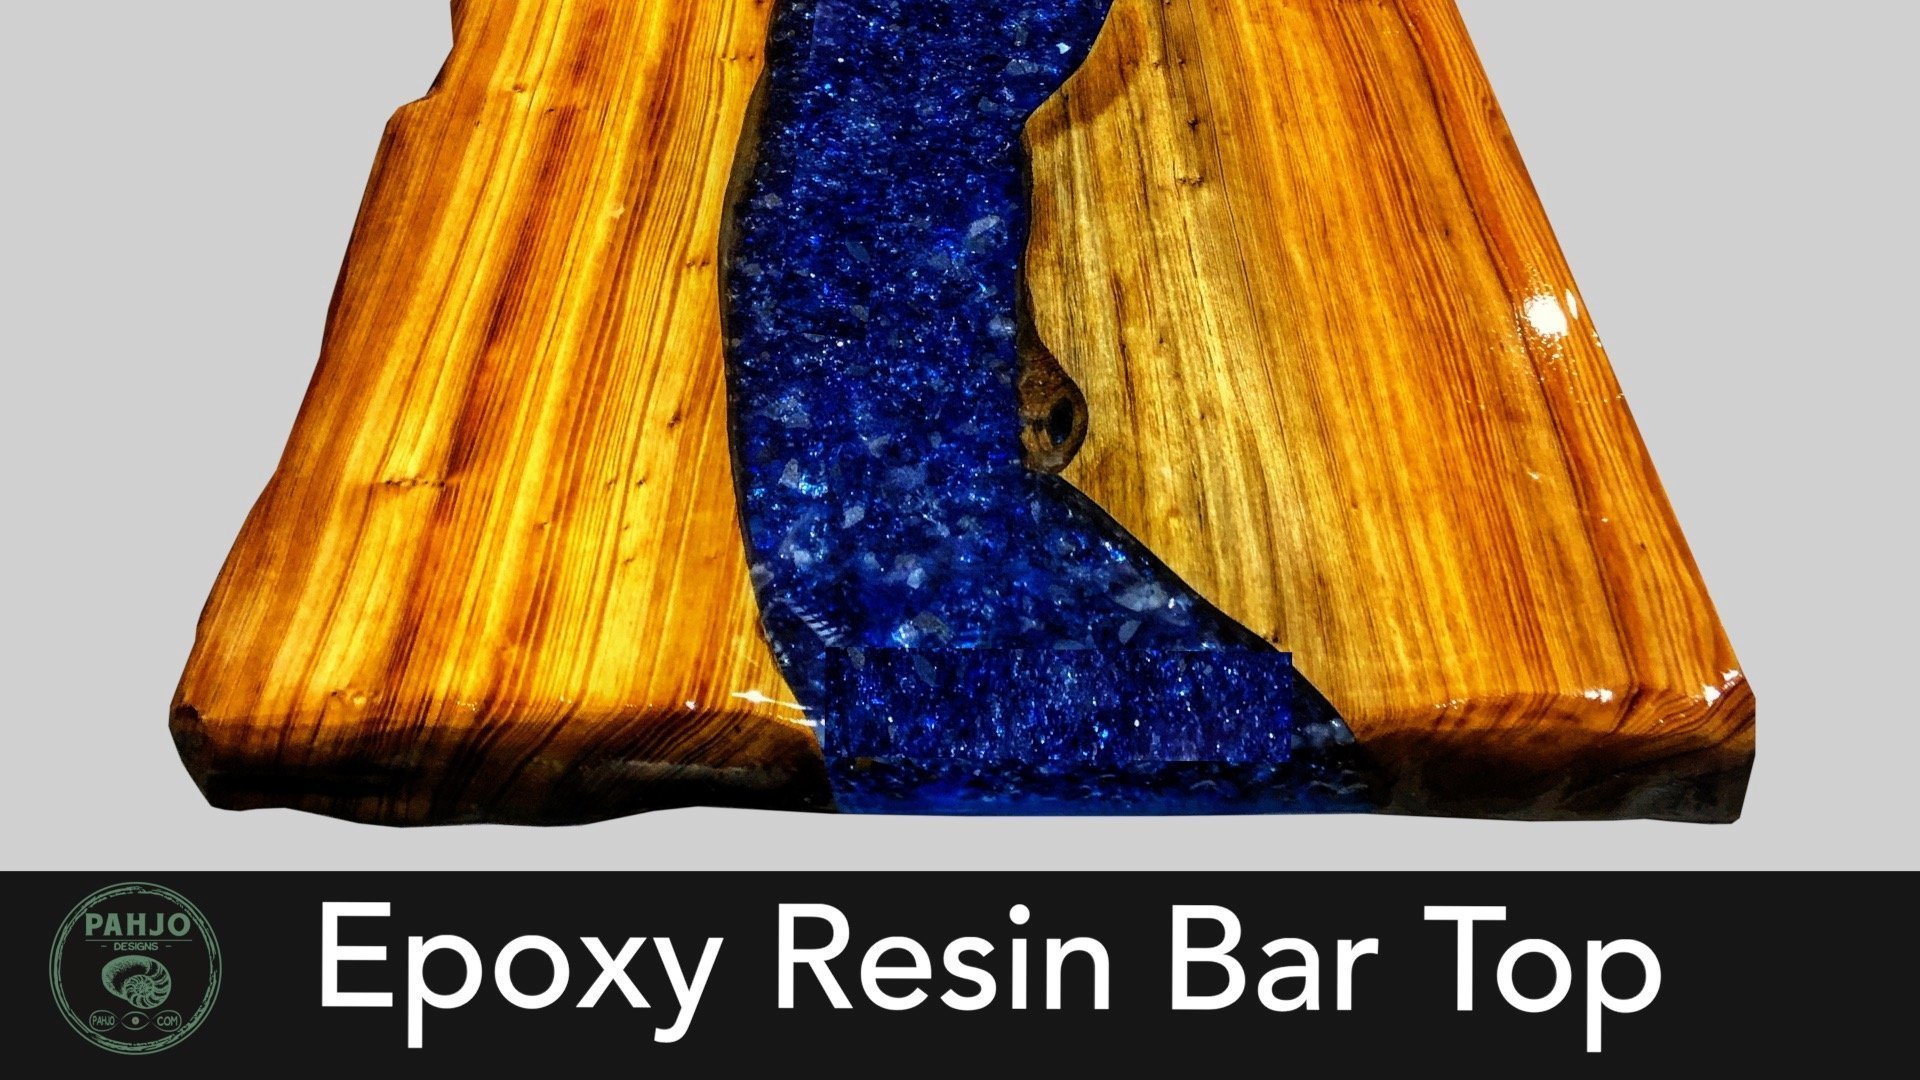 35 Best Pictures How To Epoxy A Bar Top / Live Edge Elm Epoxy Resin Bar Top From 4700 Syevensville Pa